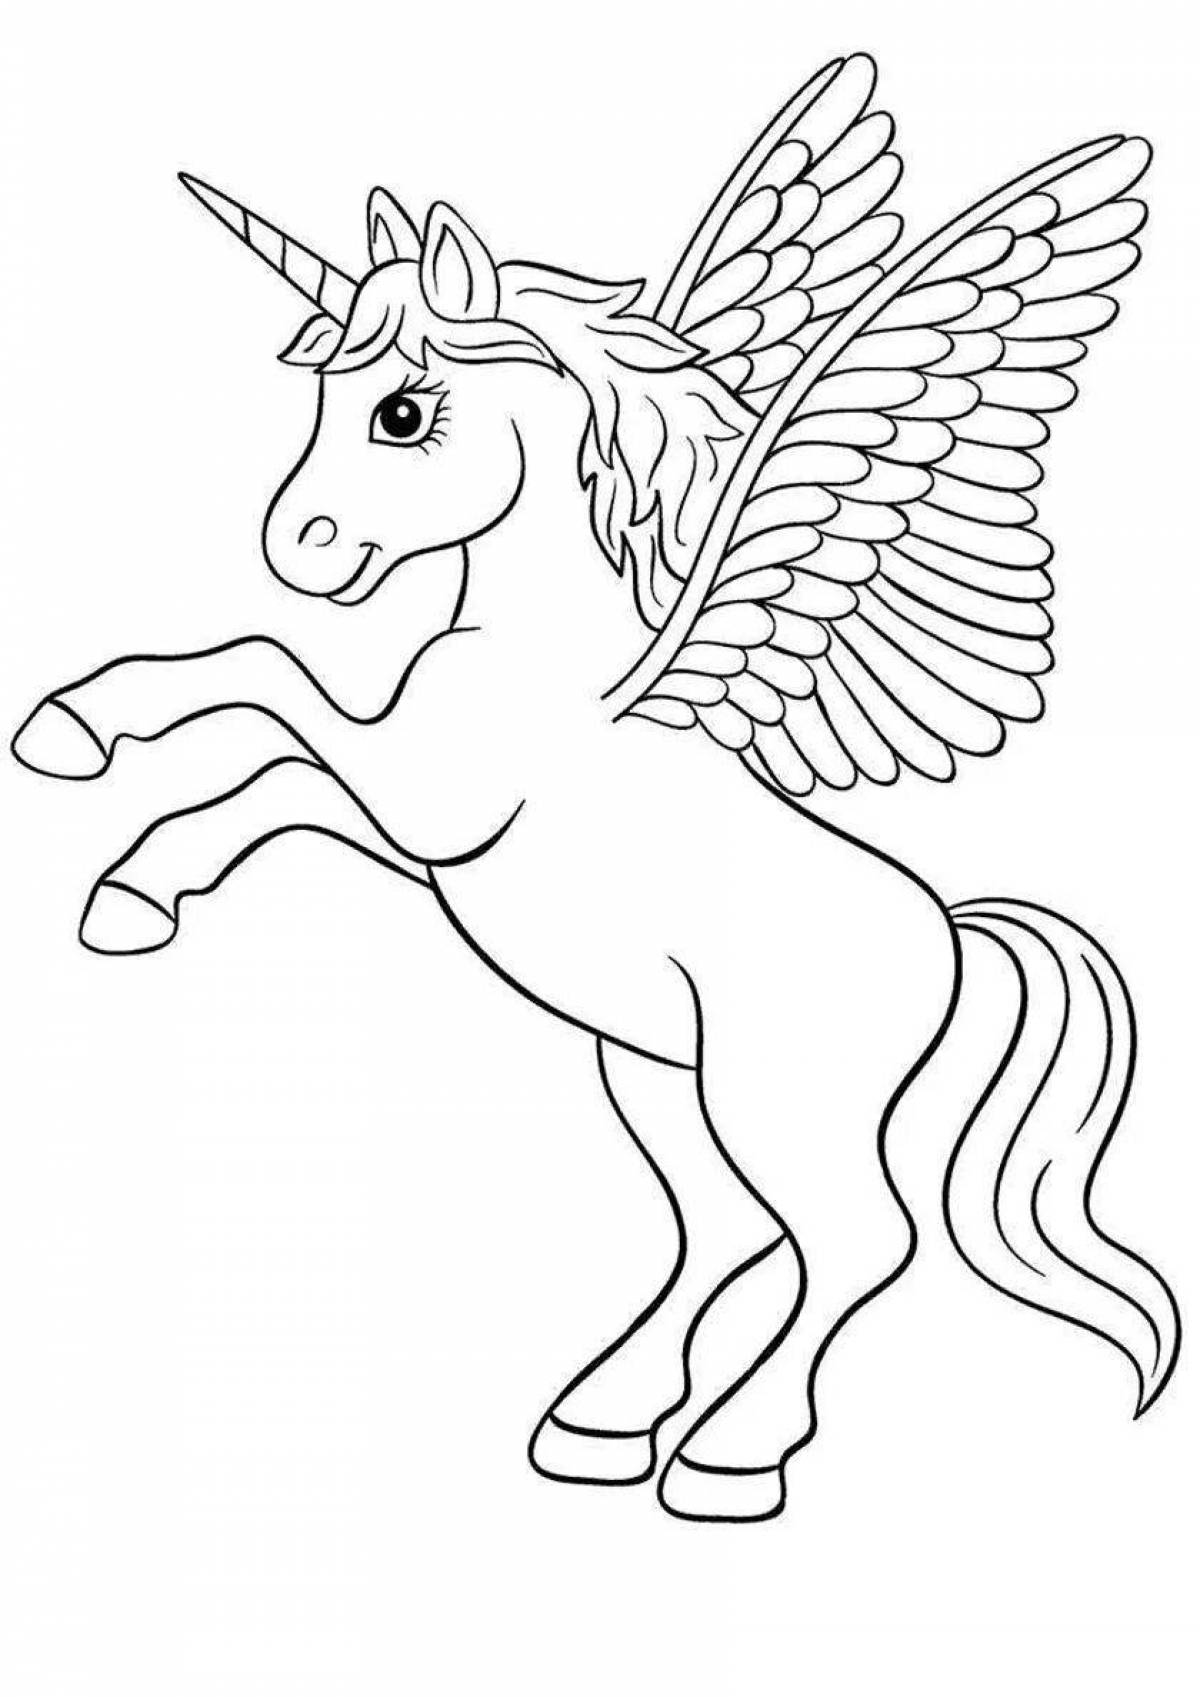 Grand coloring page pegasi and unicorns